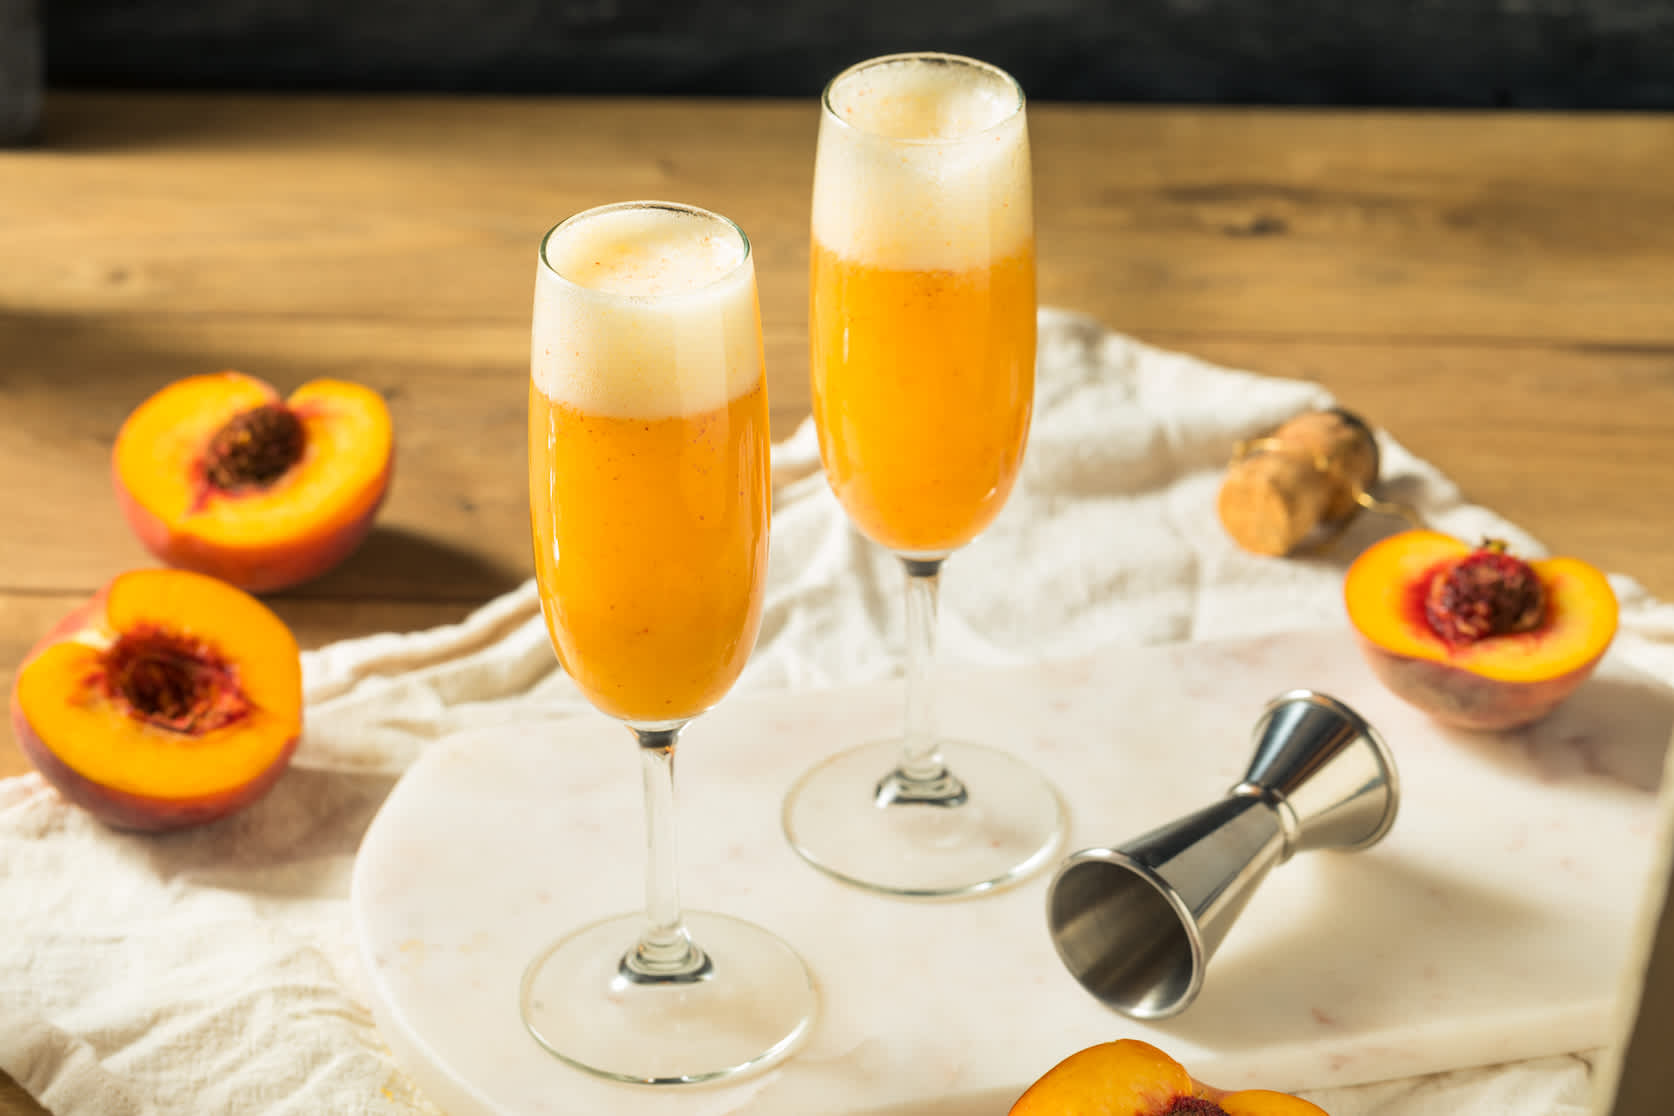 The Most Delicious Bellini You’ve Ever Tried